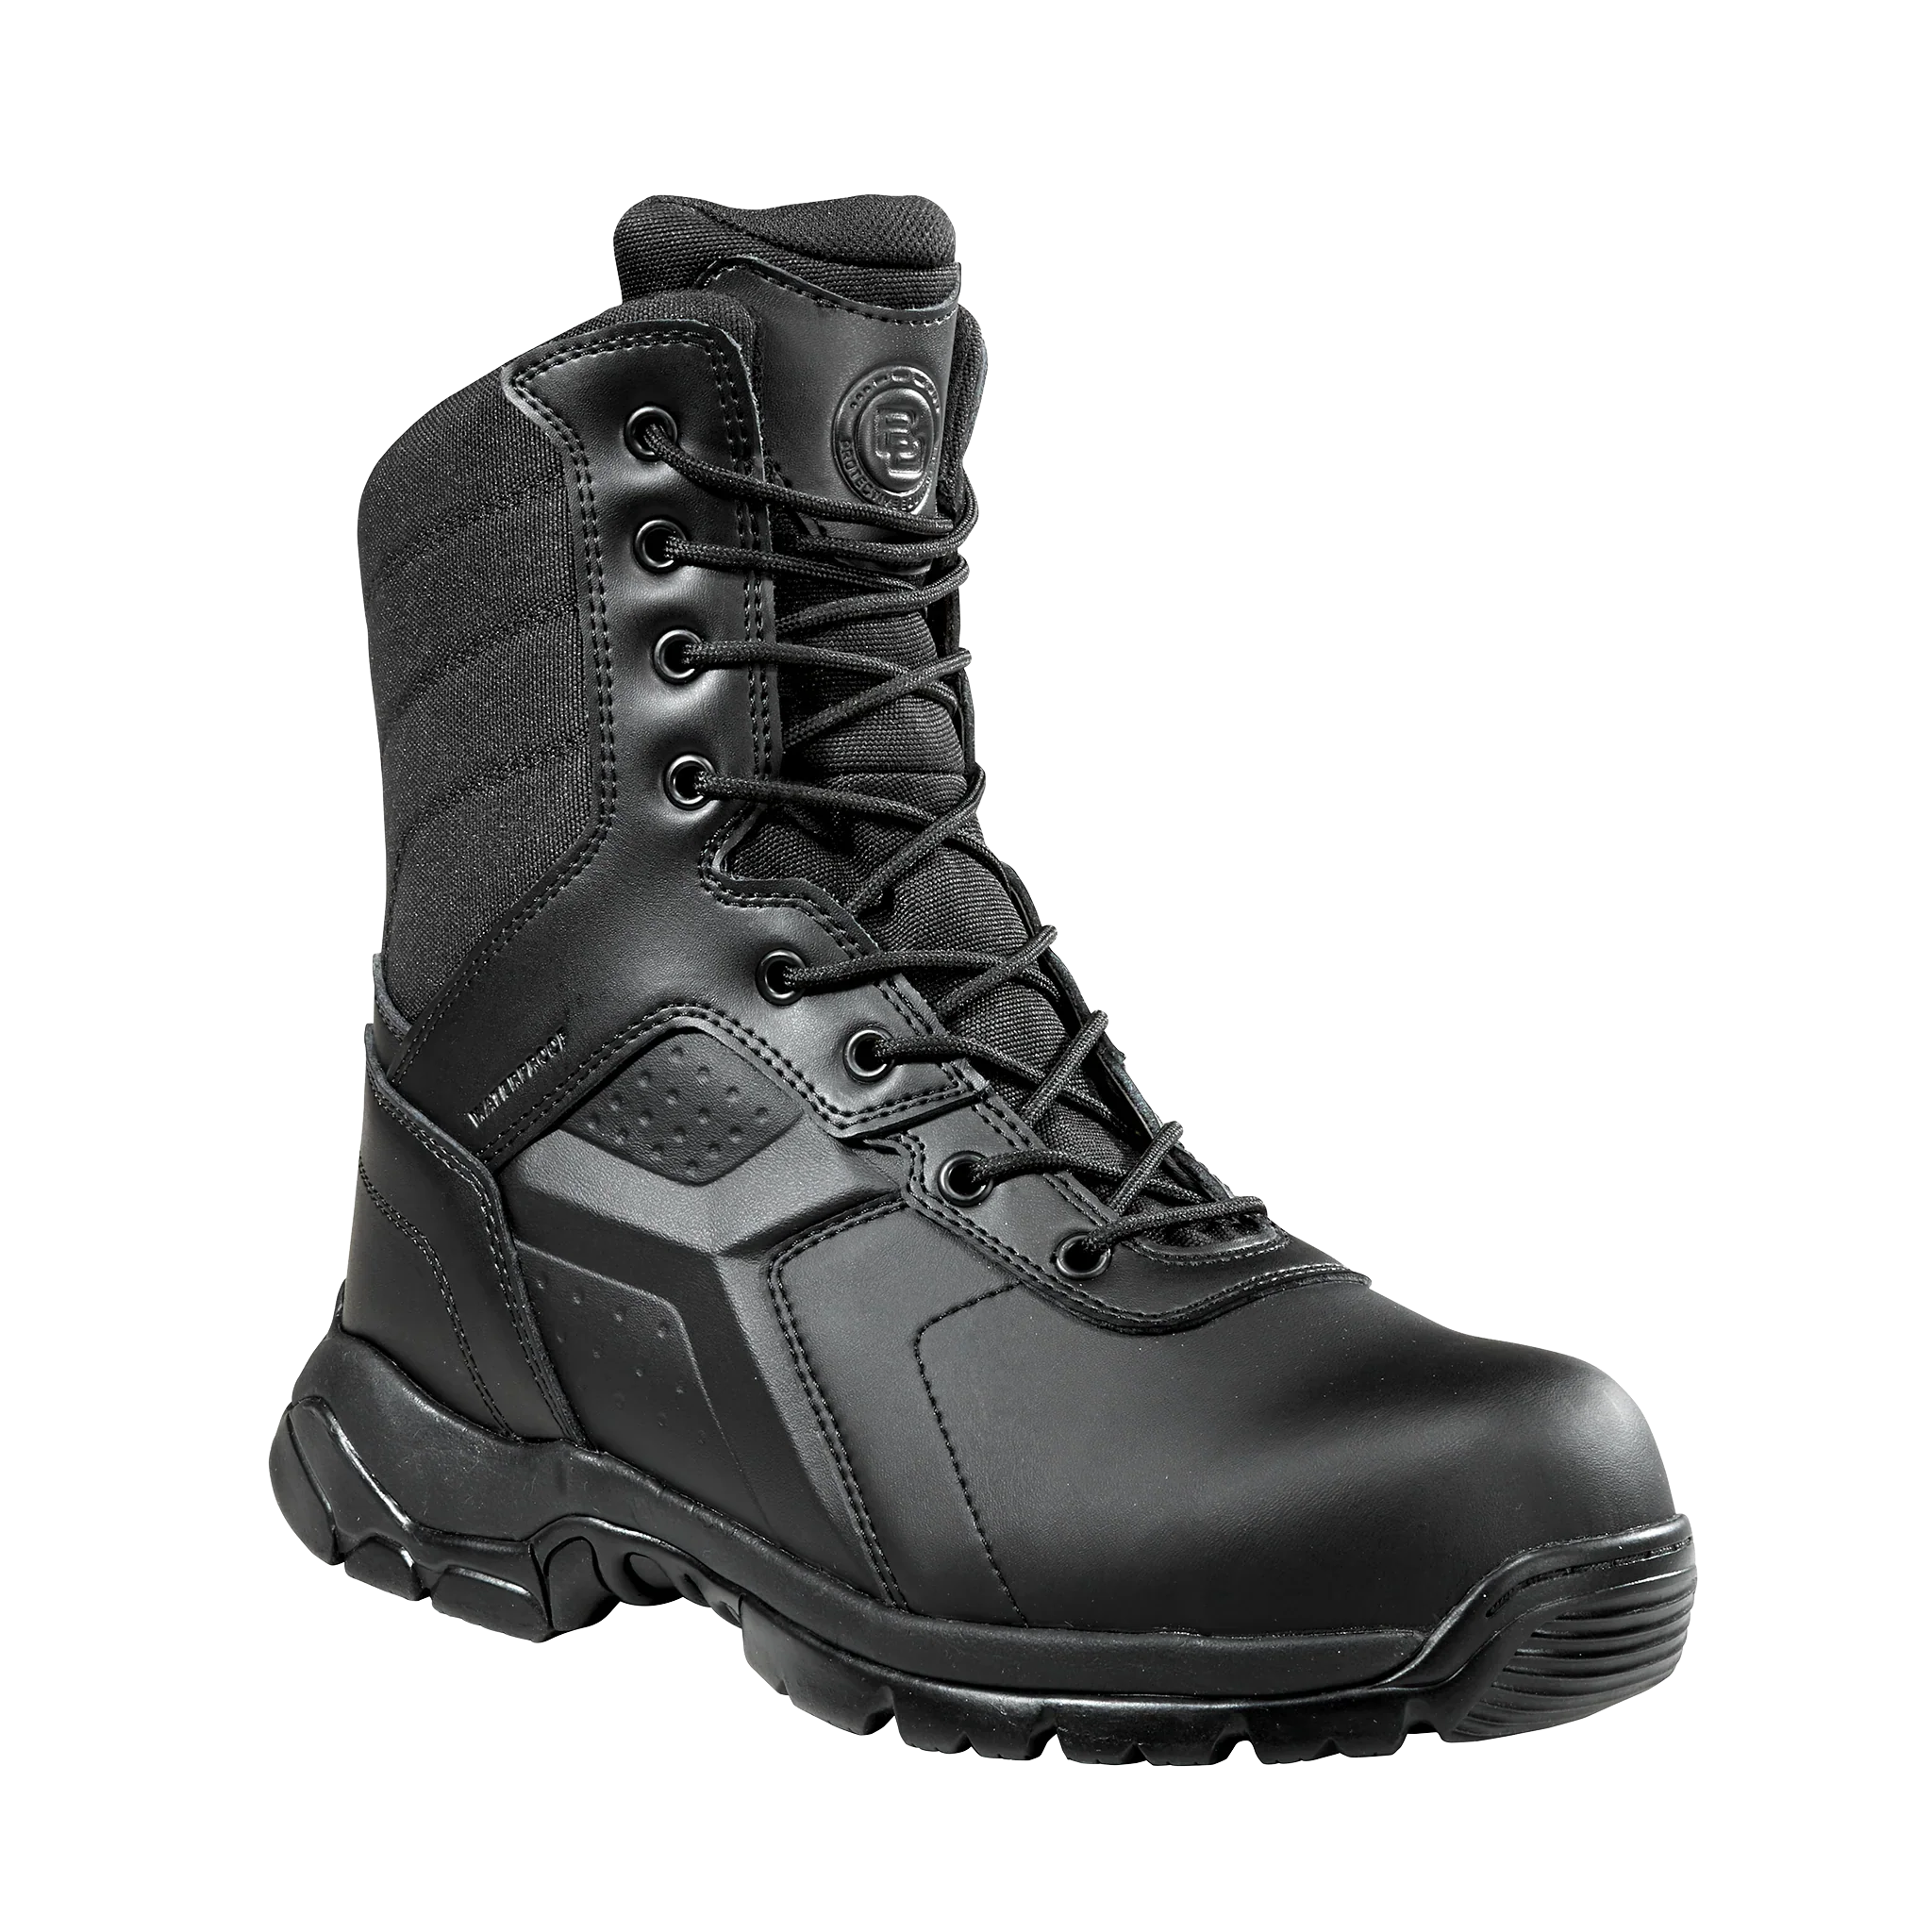 Black Diamond 8-Inch Waterproof Tactical Boot - Side Zip Non Safety Toe